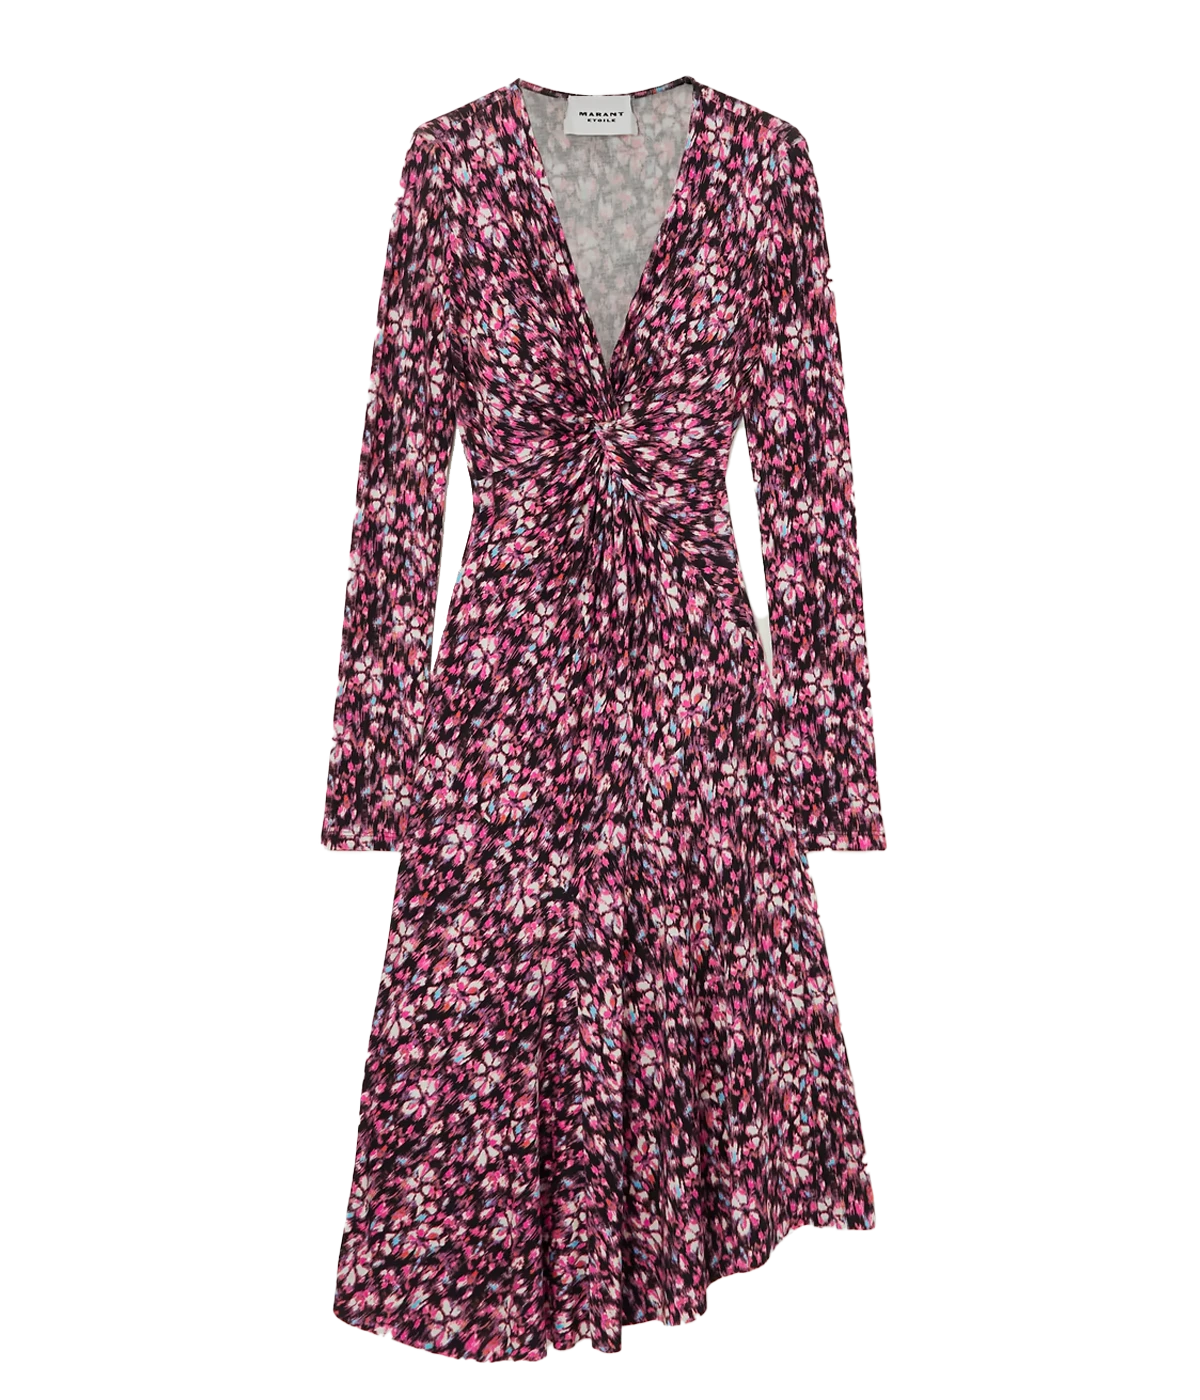 An elevated basic everyday jersey dress, with a pink and purple floral pattern, long sleeves, midi style, v neckline and gathered knot detail. Long Lunch, throw on and go, bra friendly, made internationally, comfortable. 